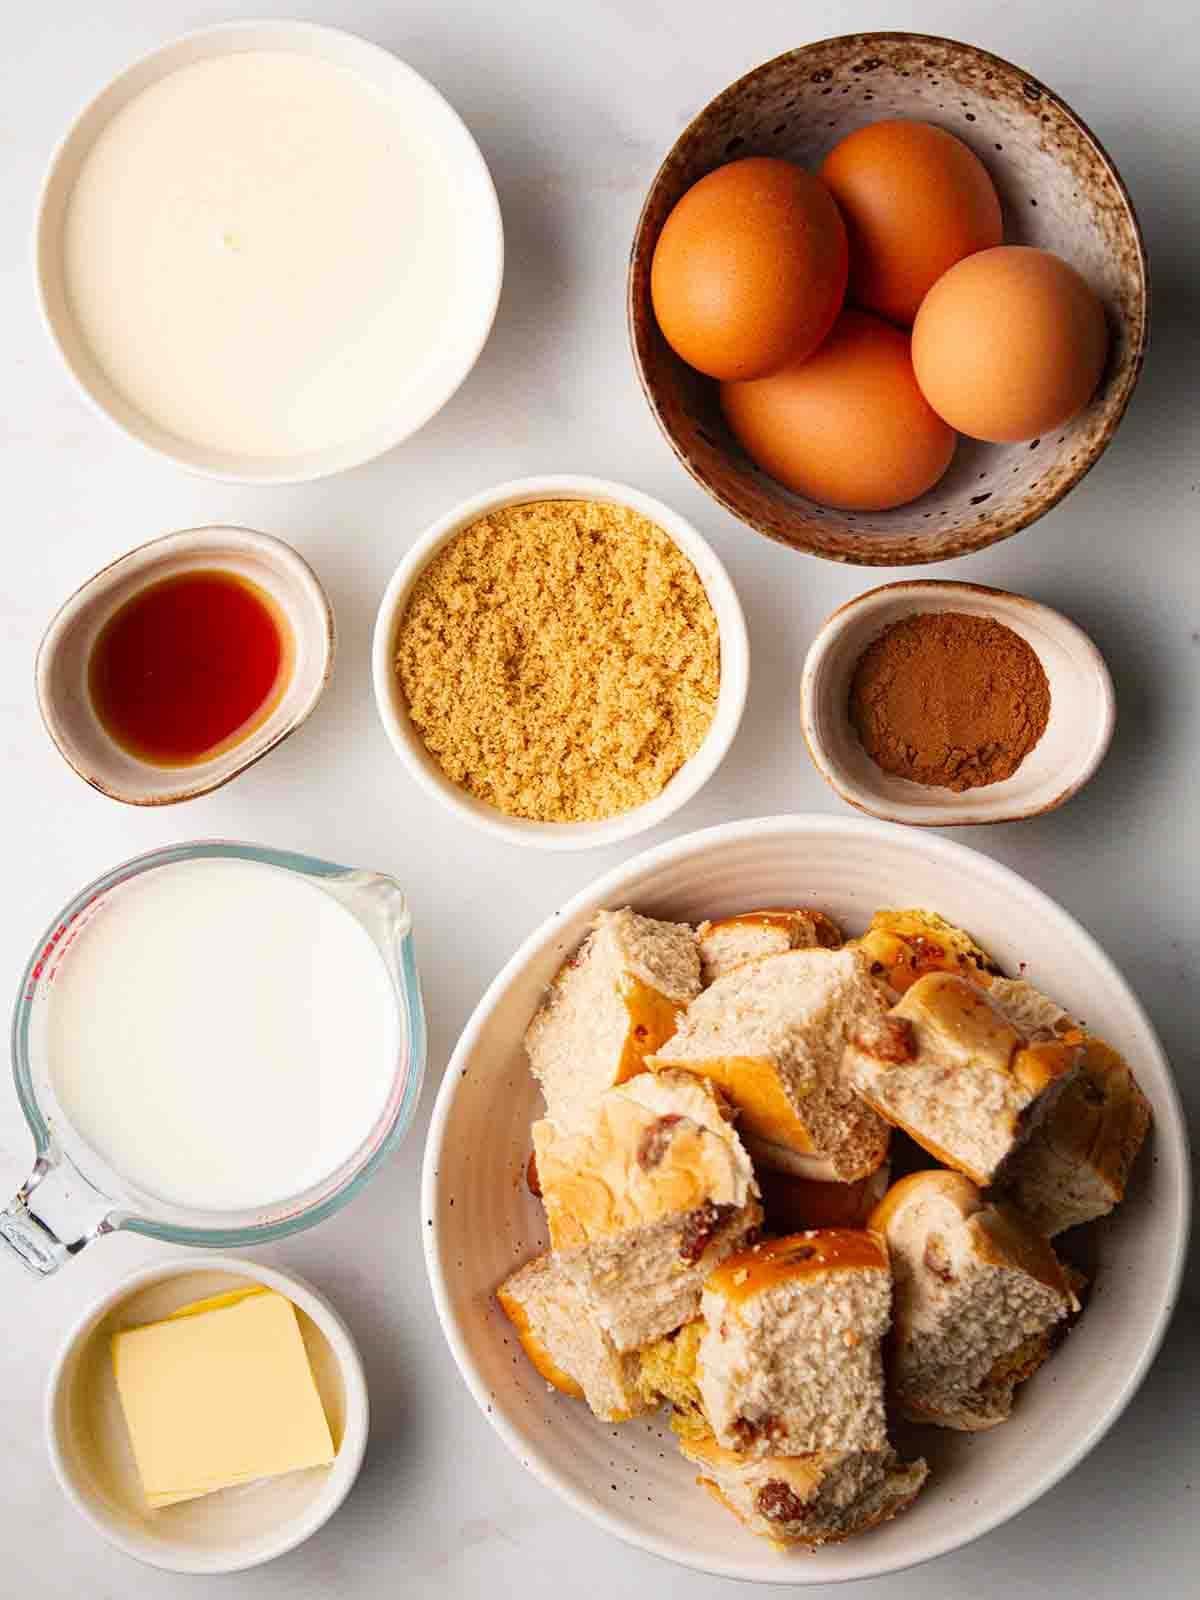 Ingredients for Hot Cross Bun Bread and Butter Pudding laid out on a counter.